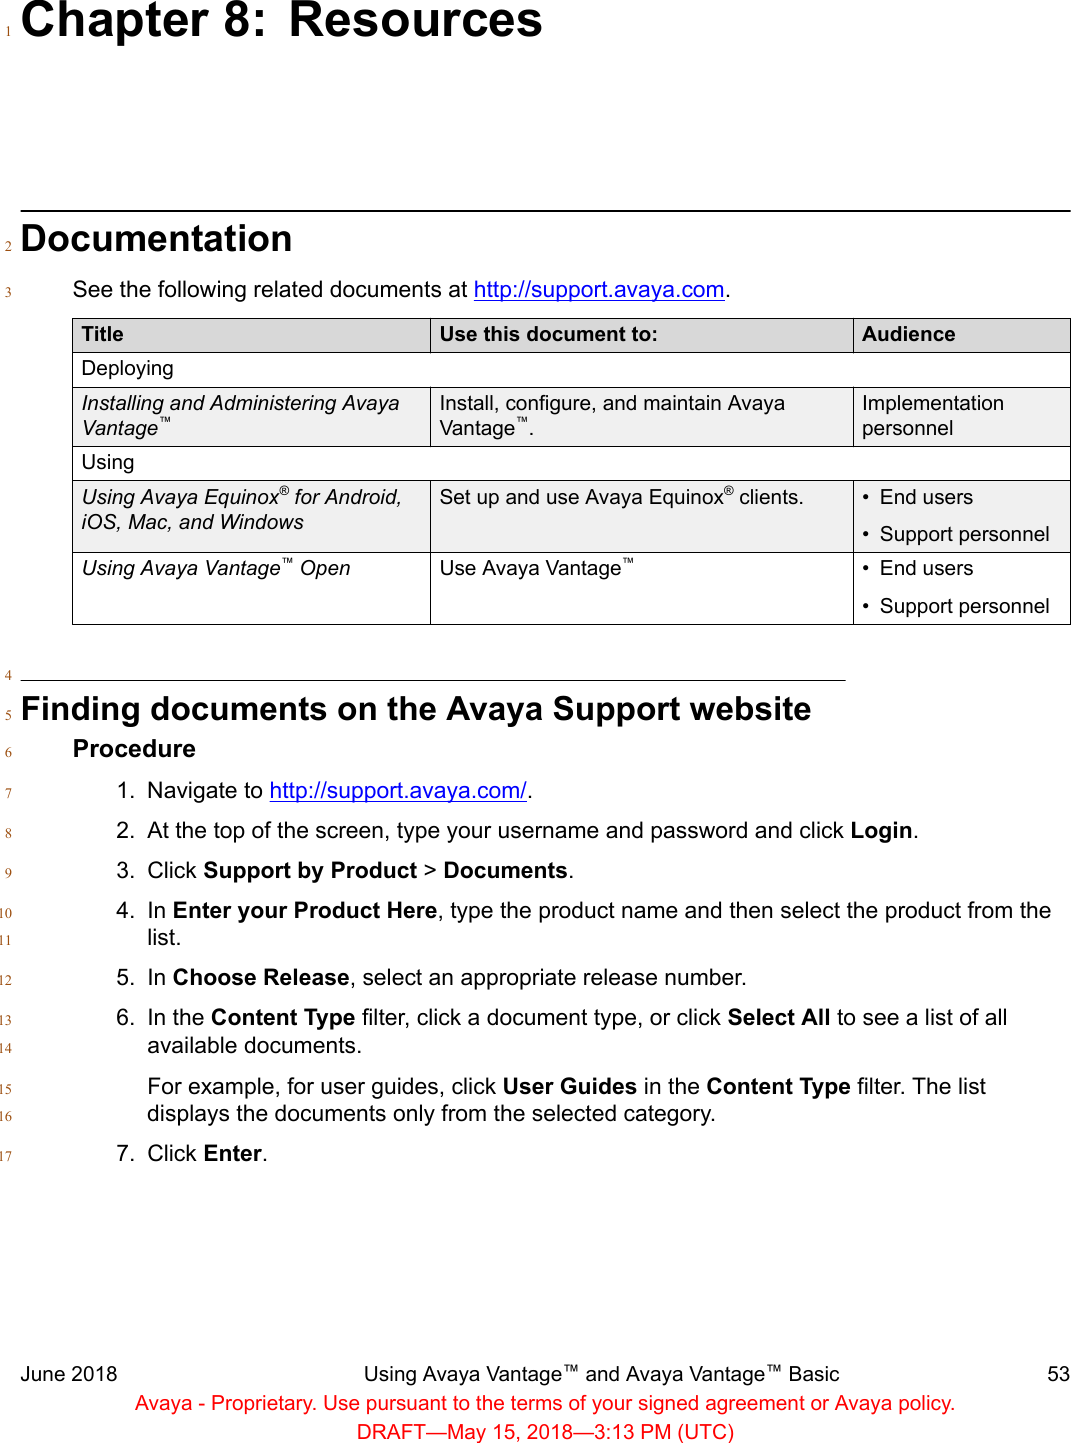 Chapter 8: Resources1Documentation2See the following related documents at http://support.avaya.com.3Title Use this document to: AudienceDeployingInstalling and Administering AvayaVantage™Install, configure, and maintain AvayaVantage™.ImplementationpersonnelUsingUsing Avaya Equinox® for Android,iOS, Mac, and WindowsSet up and use Avaya Equinox® clients. • End users• Support personnelUsing Avaya Vantage™ Open Use Avaya Vantage™• End users• Support personnel4Finding documents on the Avaya Support website5Procedure61. Navigate to http://support.avaya.com/.72. At the top of the screen, type your username and password and click Login.83. Click Support by Product &gt; Documents.94. In Enter your Product Here, type the product name and then select the product from the10list.115. In Choose Release, select an appropriate release number.126. In the Content Type filter, click a document type, or click Select All to see a list of all13available documents.14For example, for user guides, click User Guides in the Content Type filter. The list15displays the documents only from the selected category.167. Click Enter.17June 2018 Using Avaya Vantage™ and Avaya Vantage™ Basic 53Avaya - Proprietary. Use pursuant to the terms of your signed agreement or Avaya policy.DRAFT—May 15, 2018—3:13 PM (UTC)